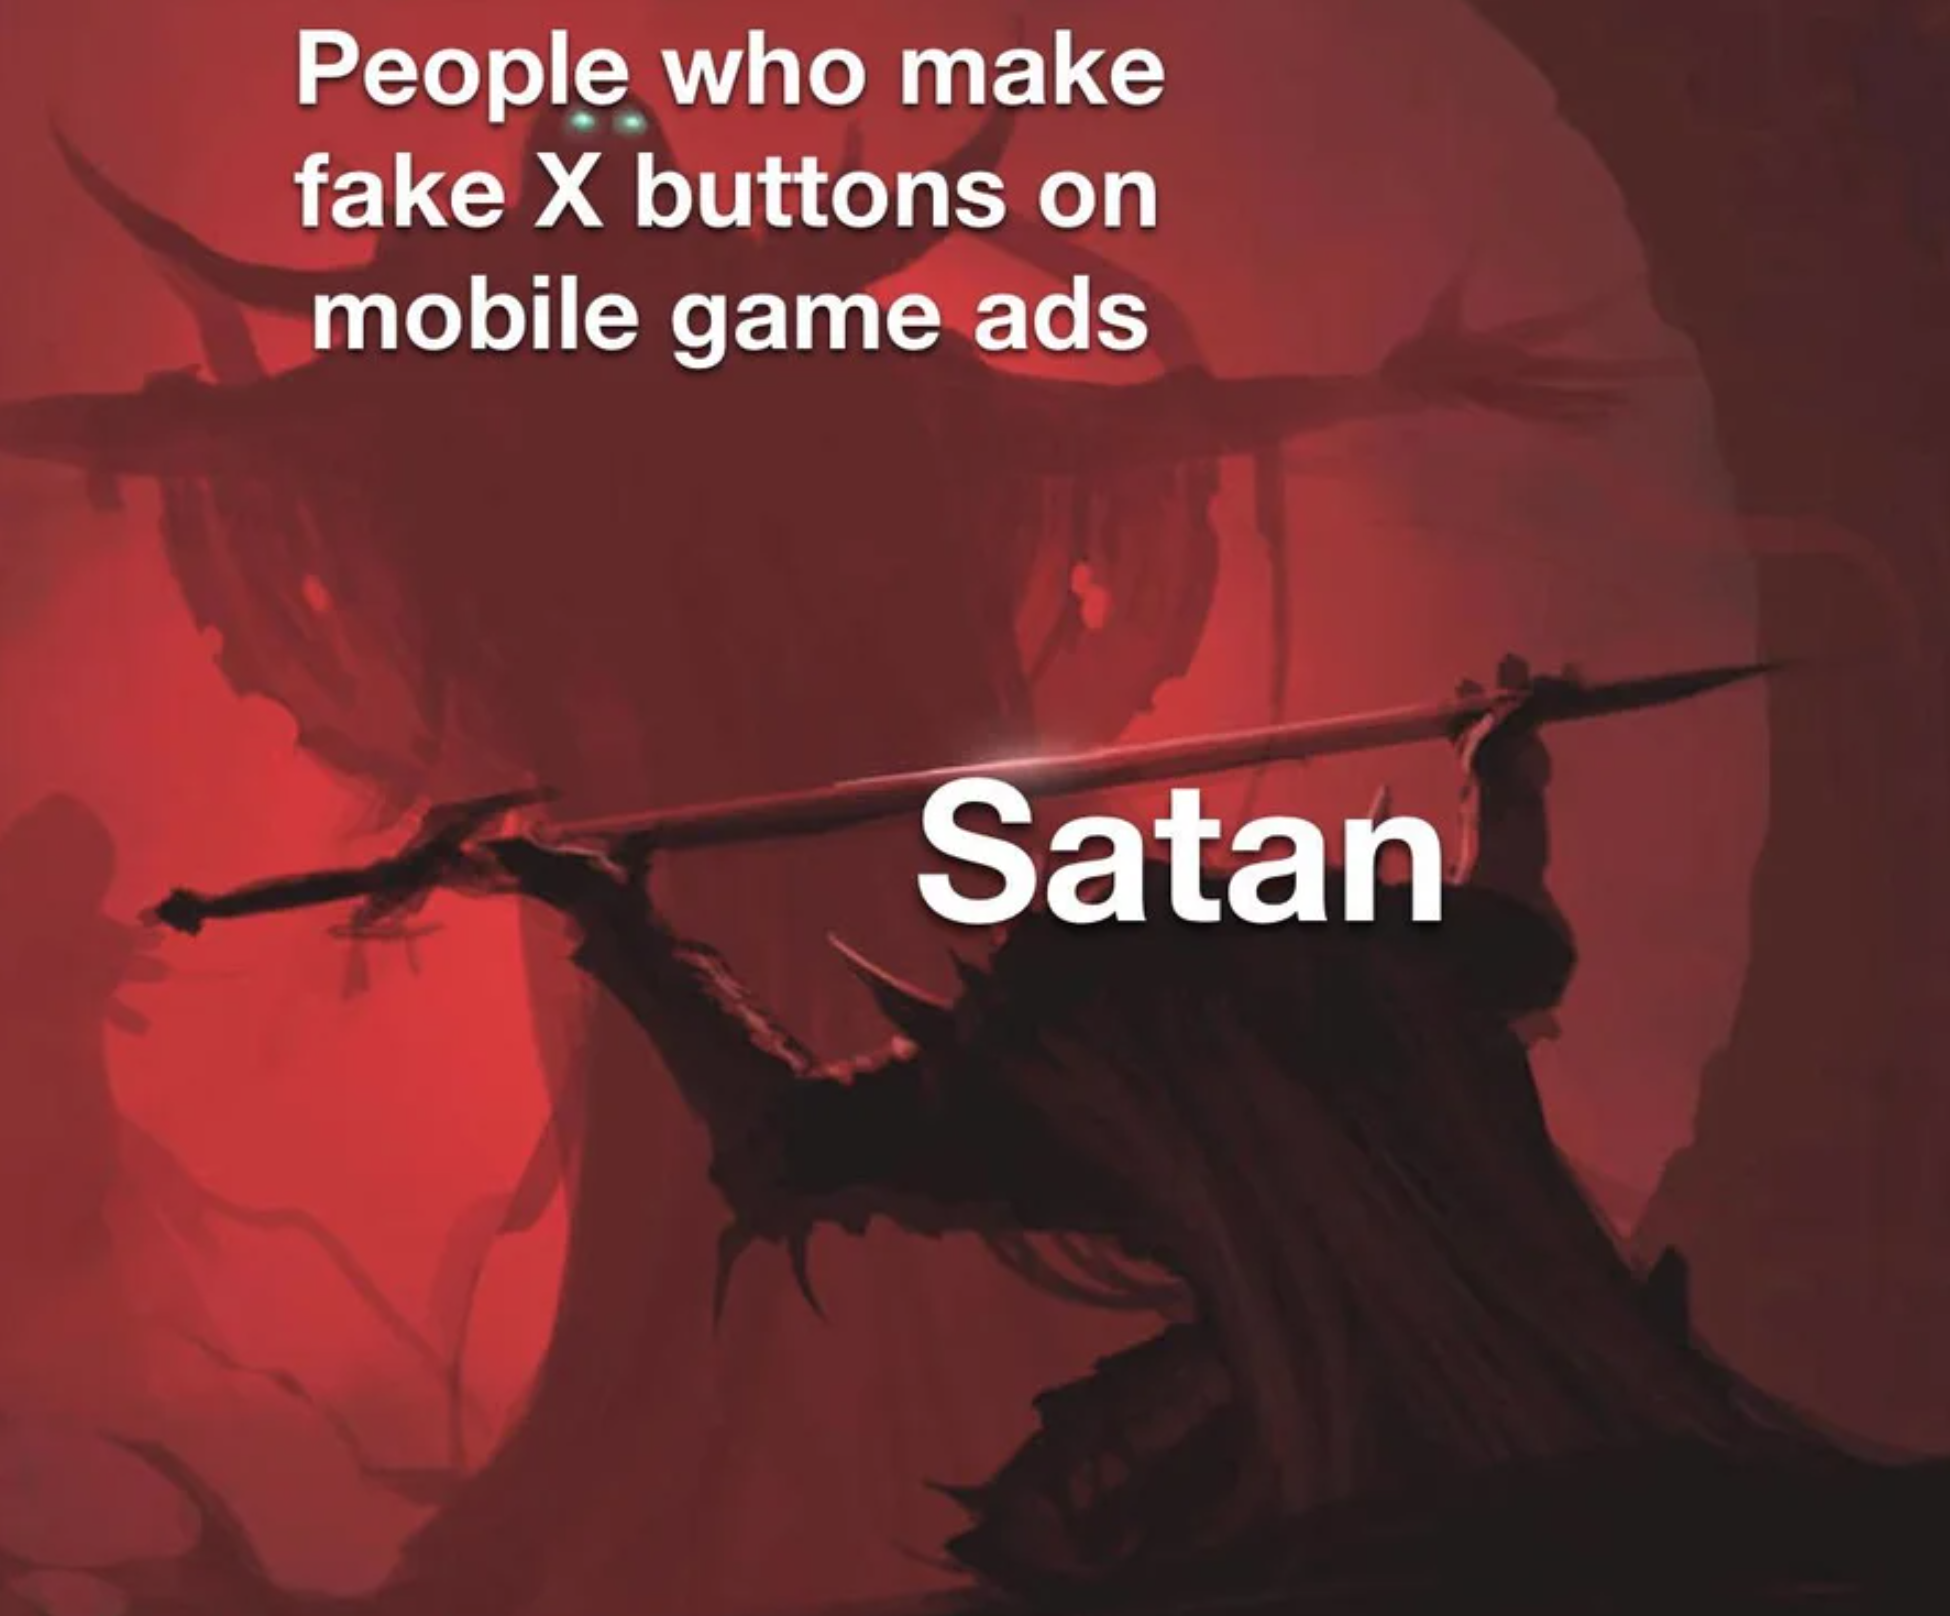 funny gaming memes  - poster - People who make fake X buttons on mobile game ads Satan